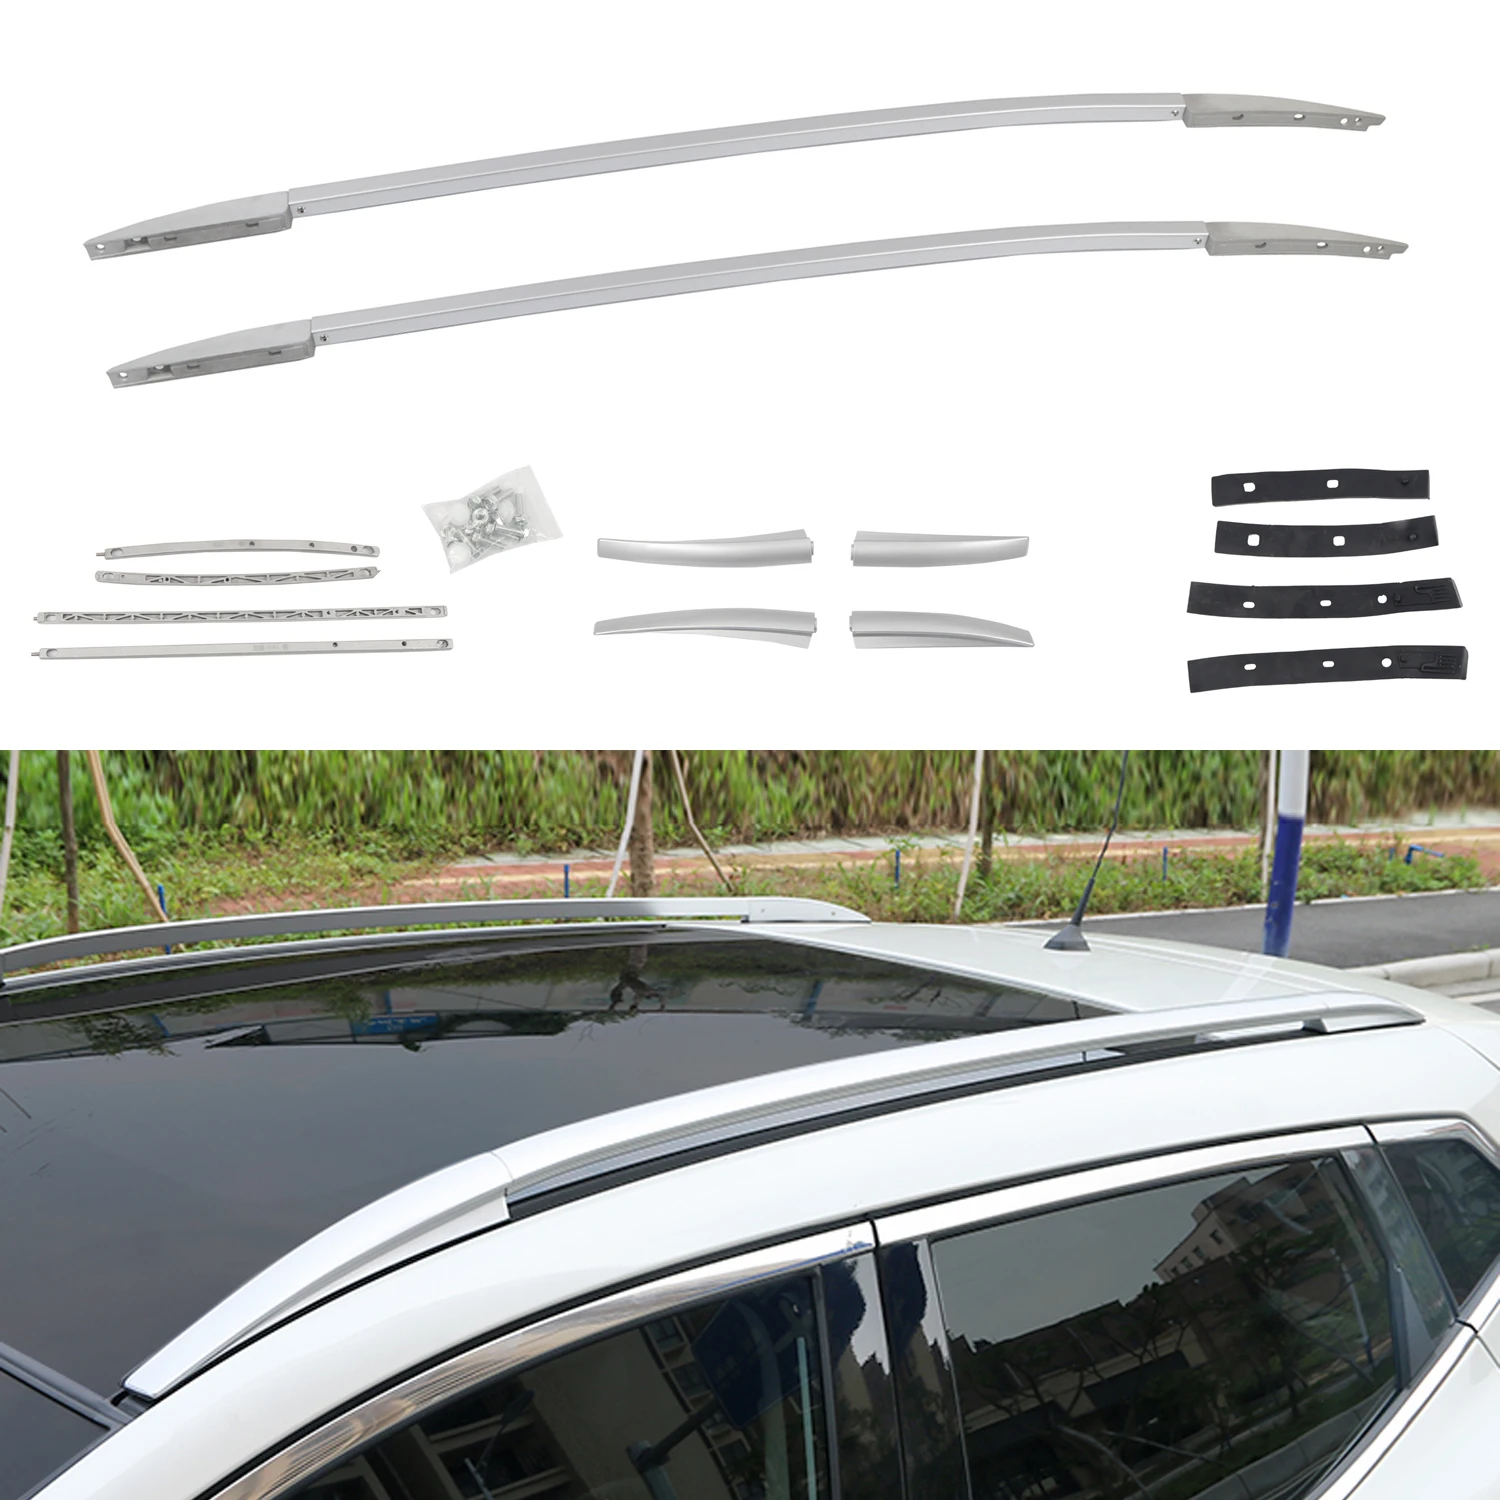 Roof Rack Side Rails Luggage Cargo For Nissan Rogue 2014-2019 Top Aluminum